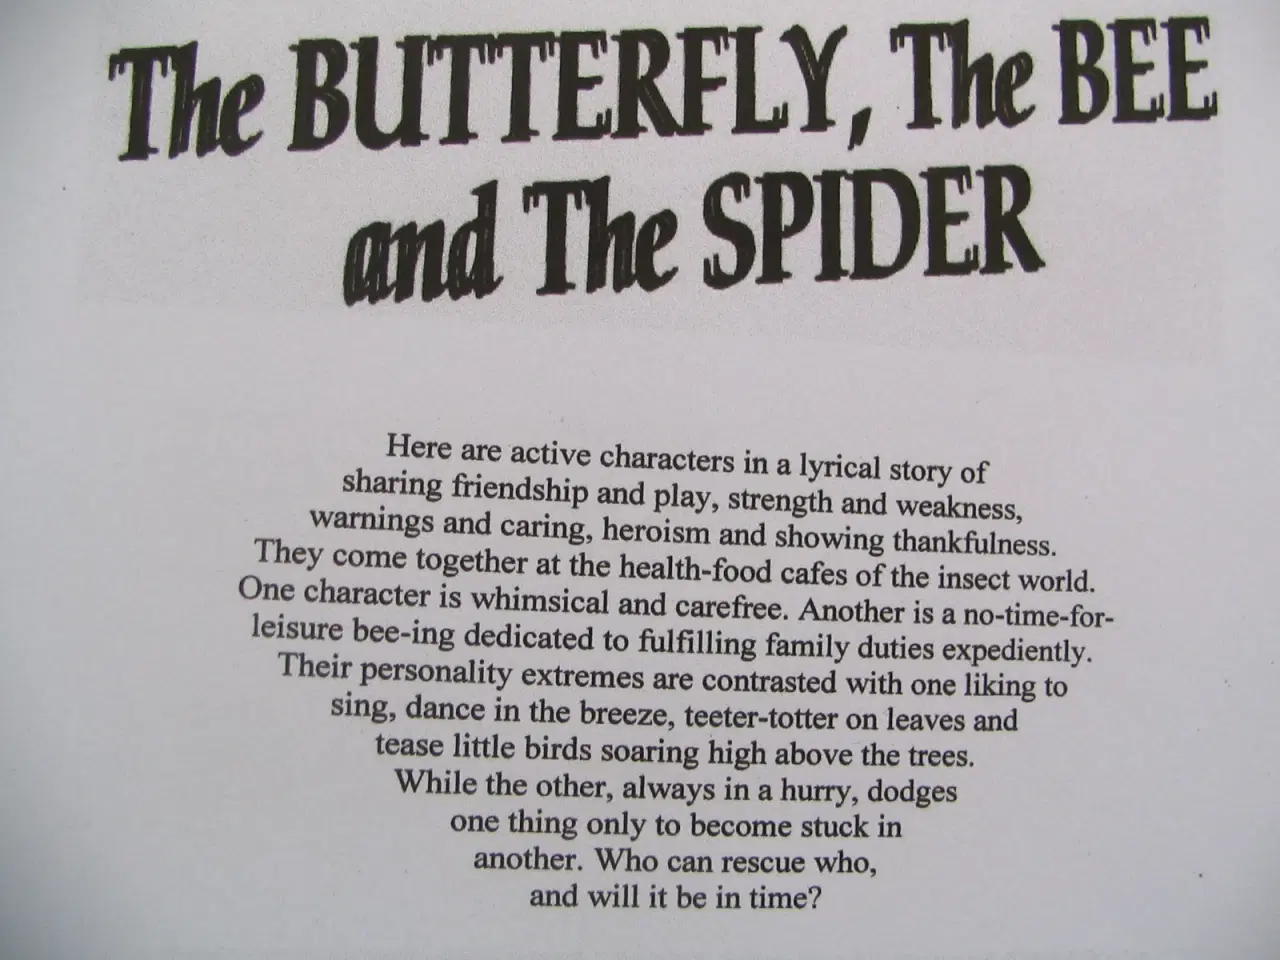 Billede 2 - The Butterfly, the Bee and the Spider